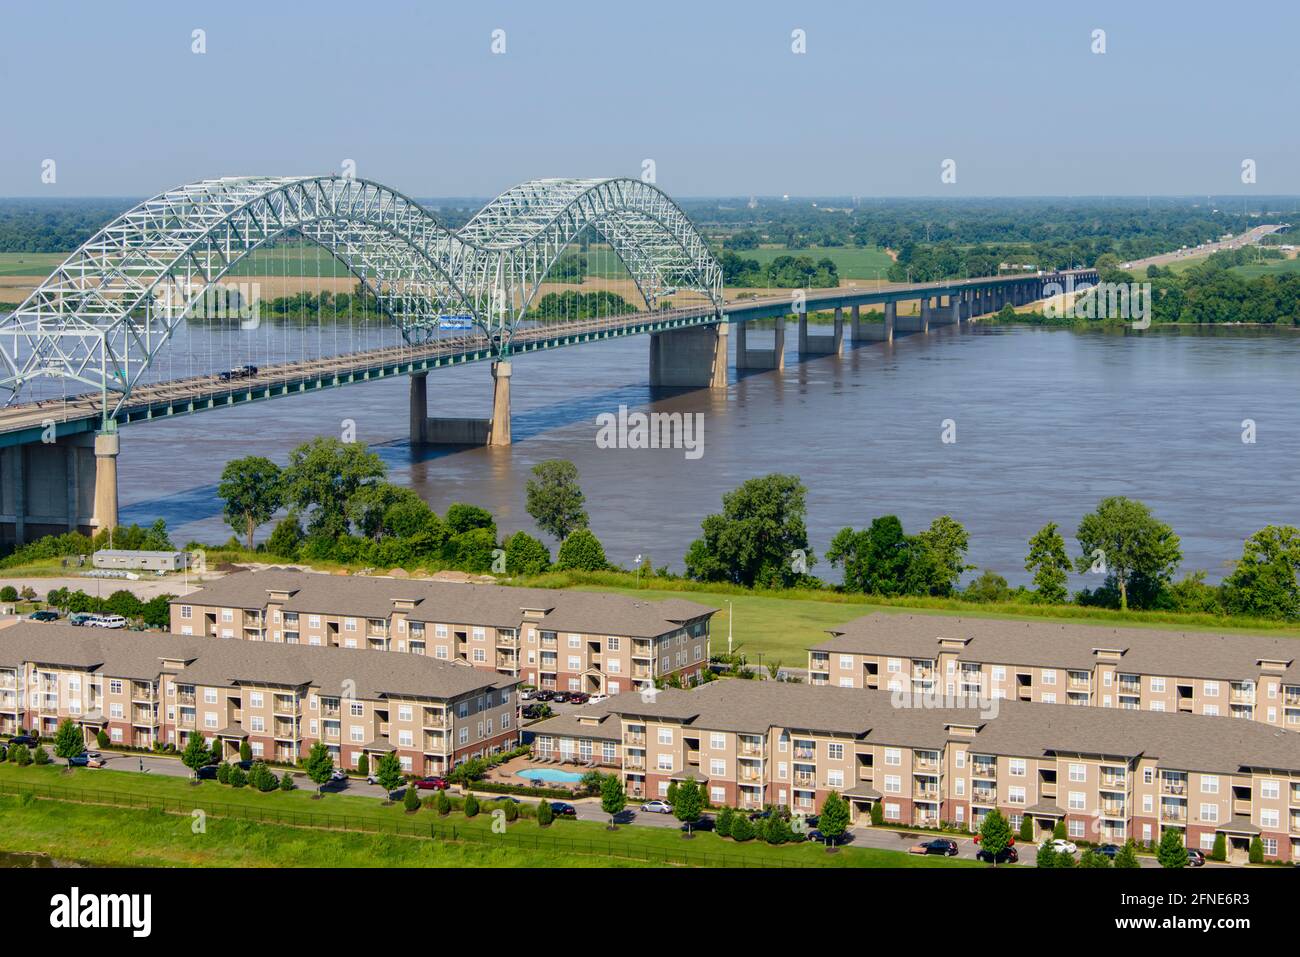 I-40 Hernando de Soto bridge from Memphis, Tennessee to West Memphis, Arkansas over the Mississippi River. Stock Photo